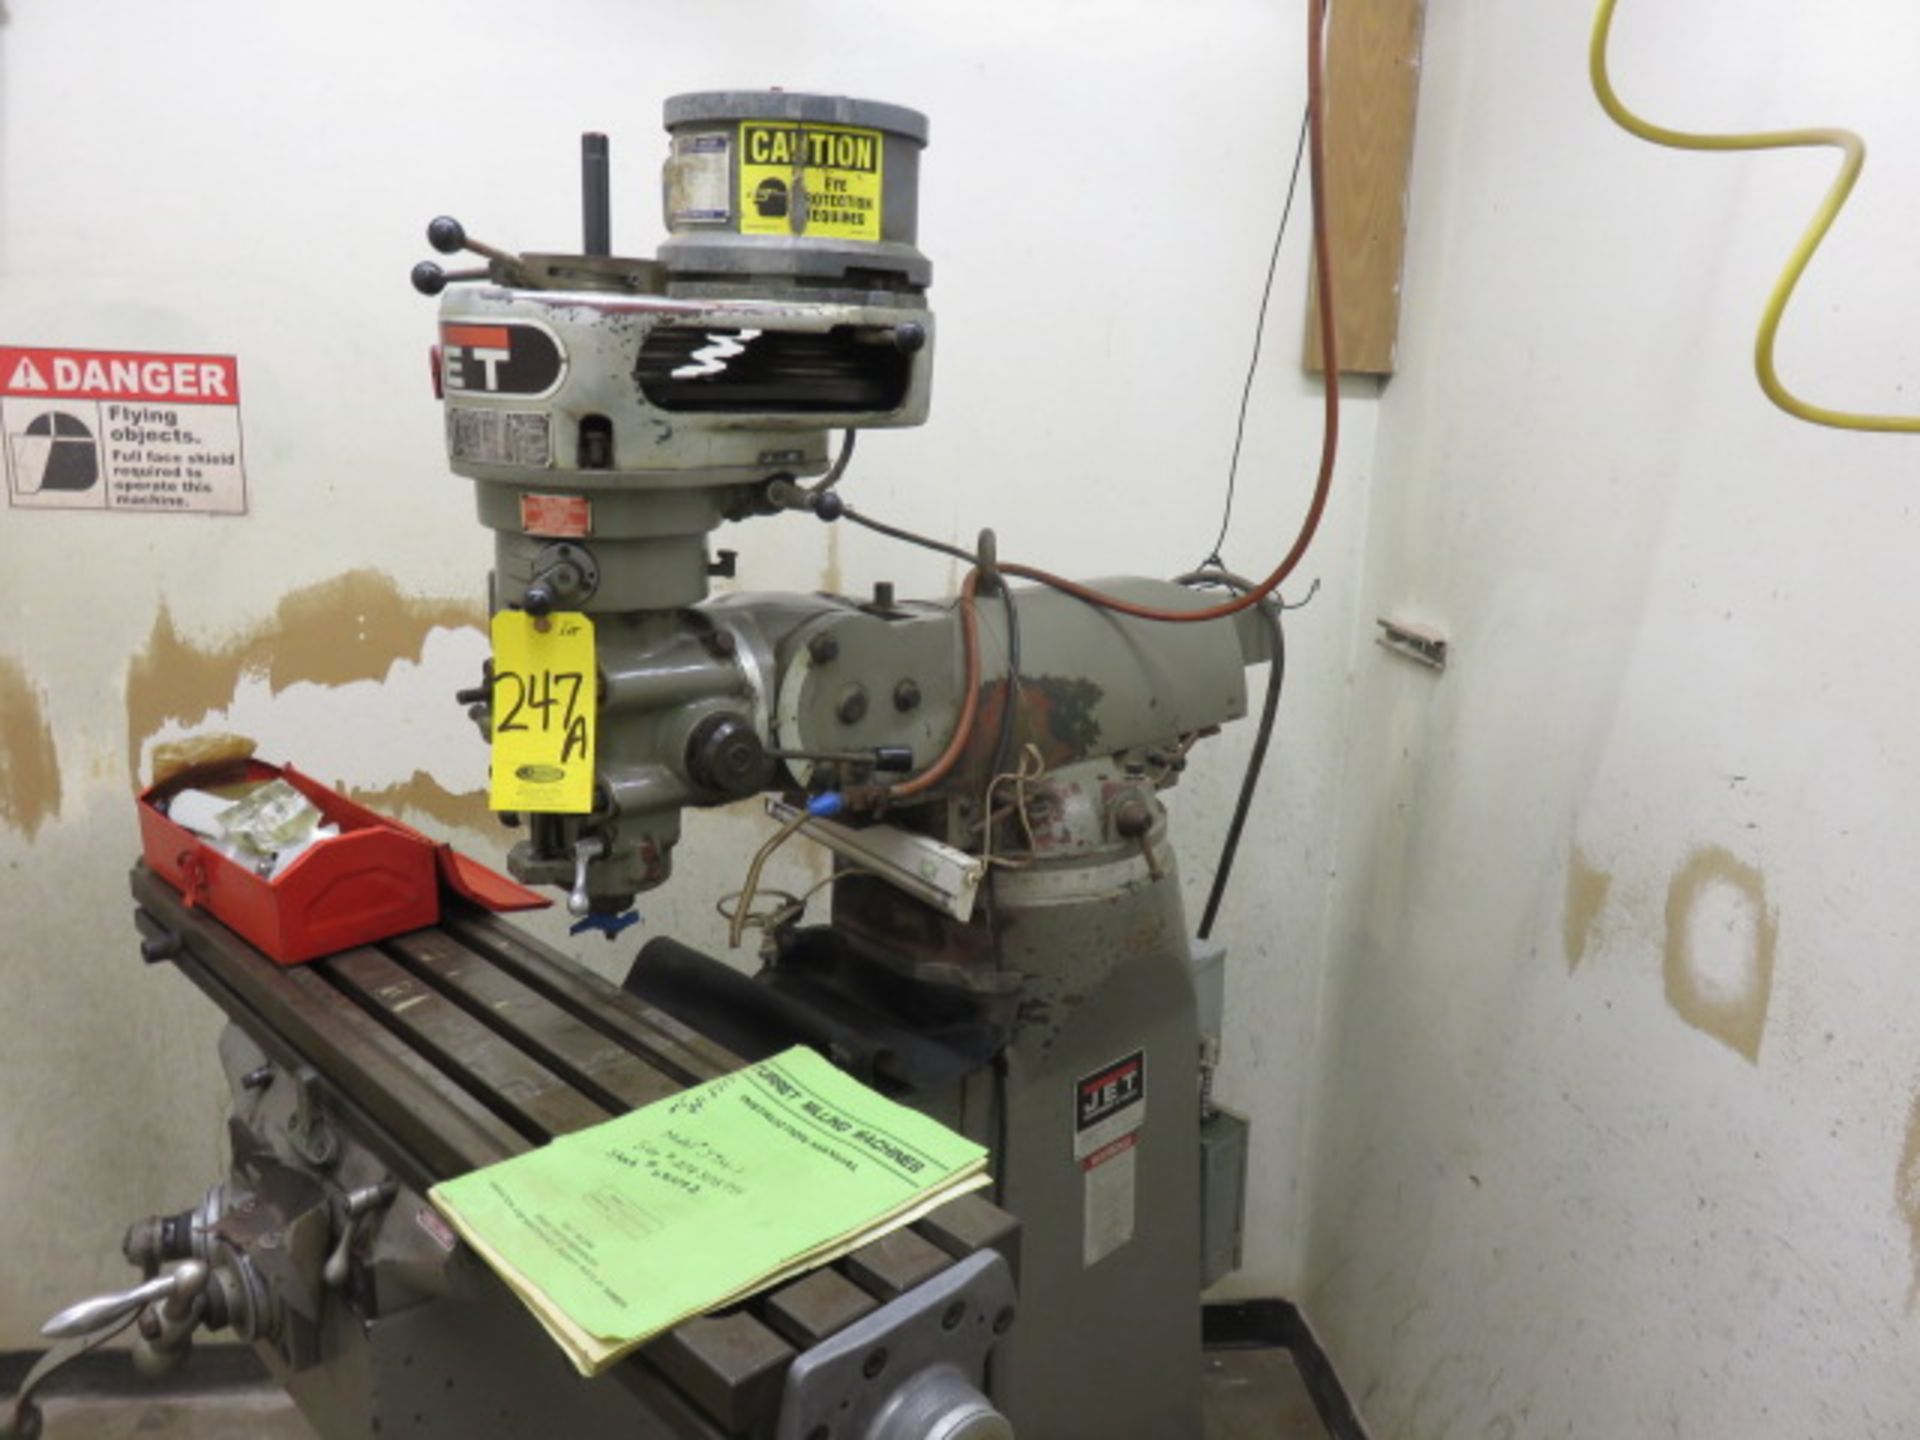 JET JTM-1 TURRET MILLING MACHINE, S/N 206 505711, NO. 690082, 9 IN. X 42 IN. TABLE, 2 HP - Image 2 of 3